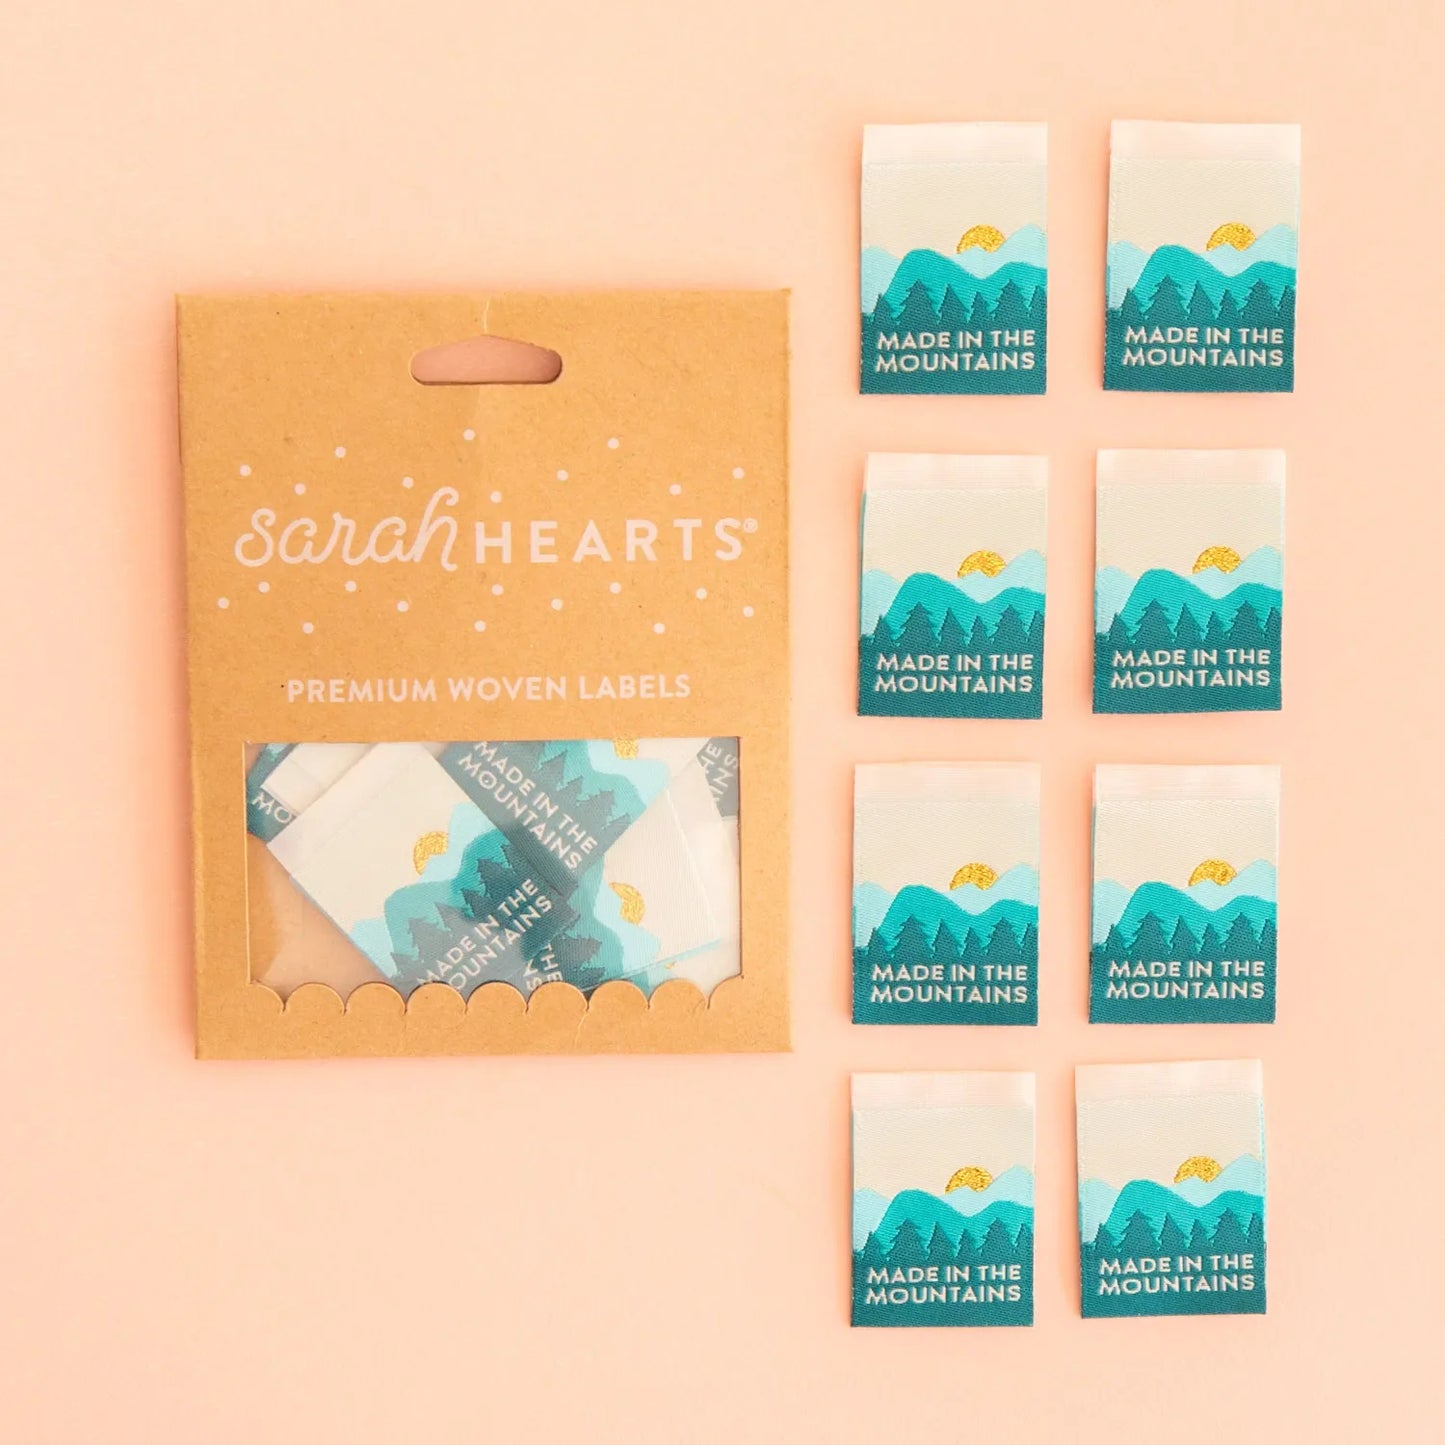 Notions: Sarah Hearts Woven Labels "MADE IN THE MOUNTAINS"- 1 Pack